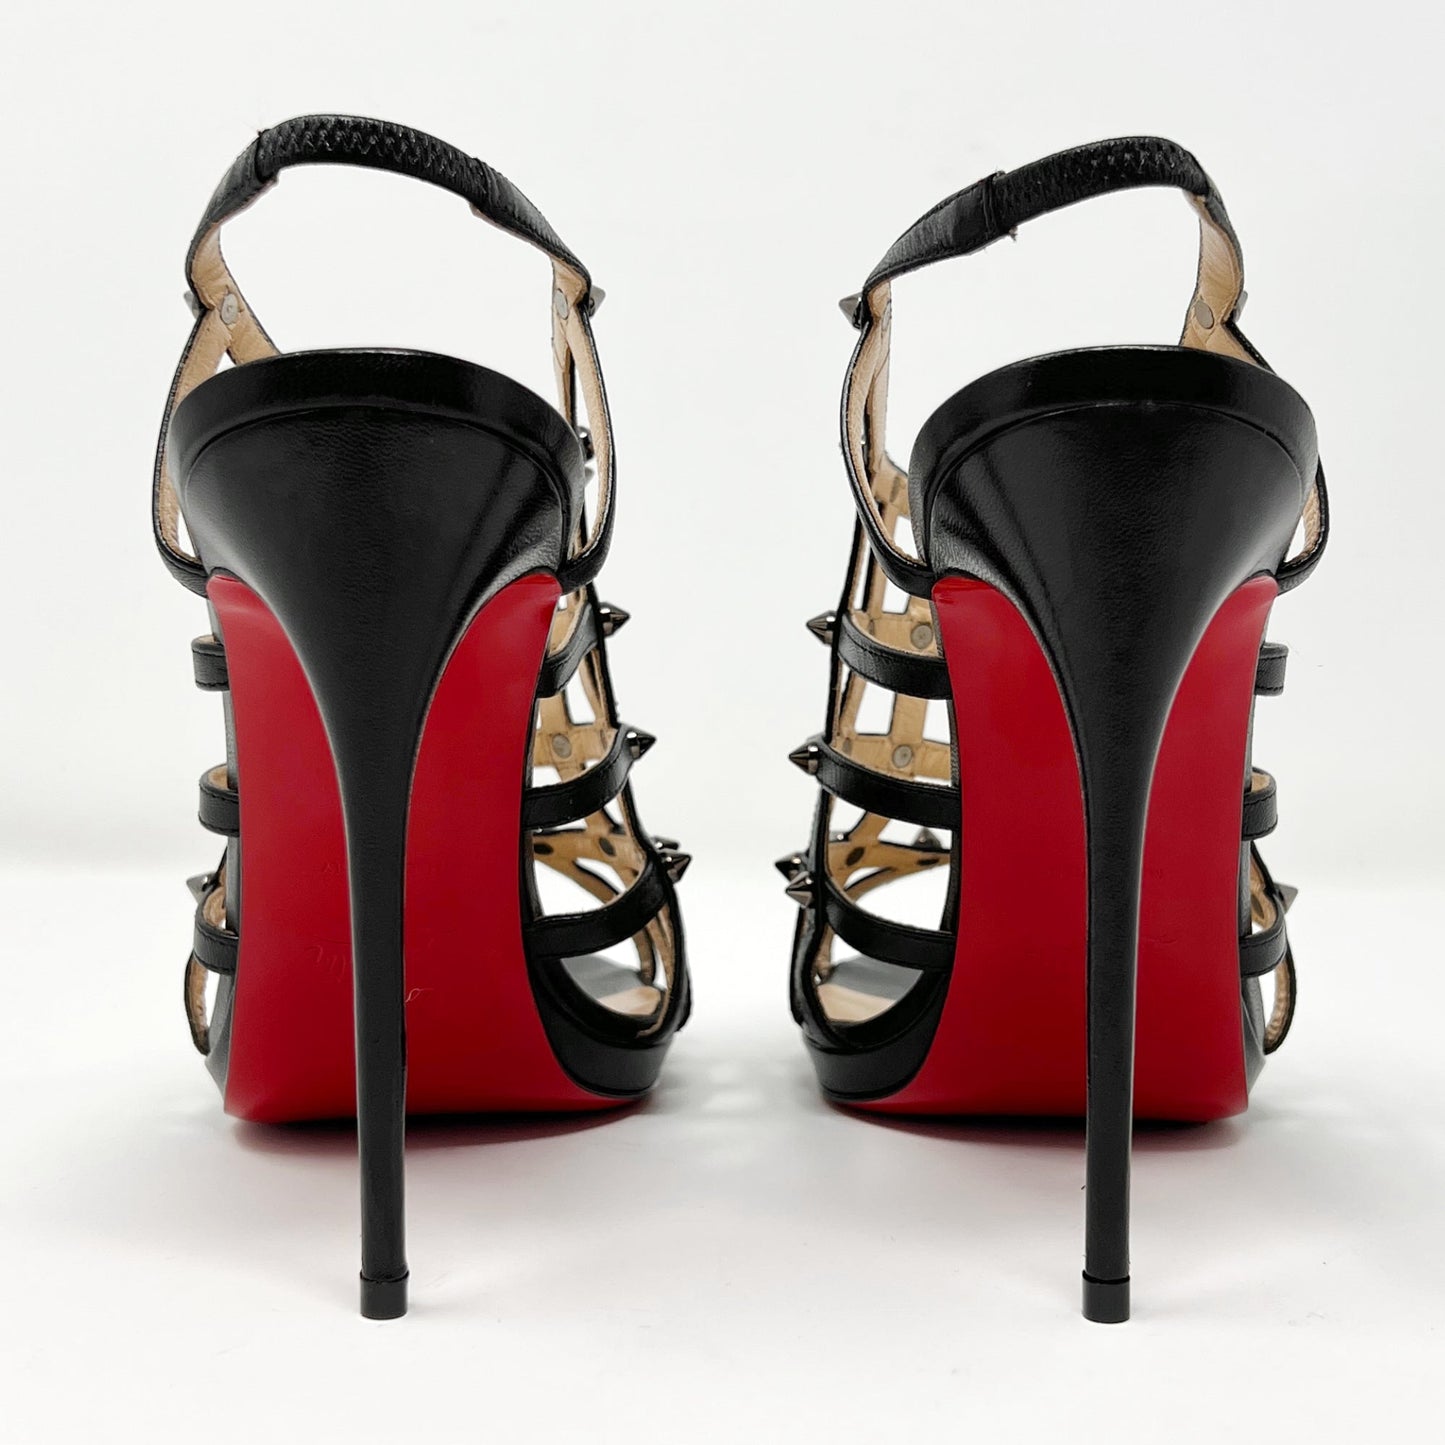 Christian Louboutin Guinievre Black Leather Strap Caged Studded Heels Sandals Size EU 38